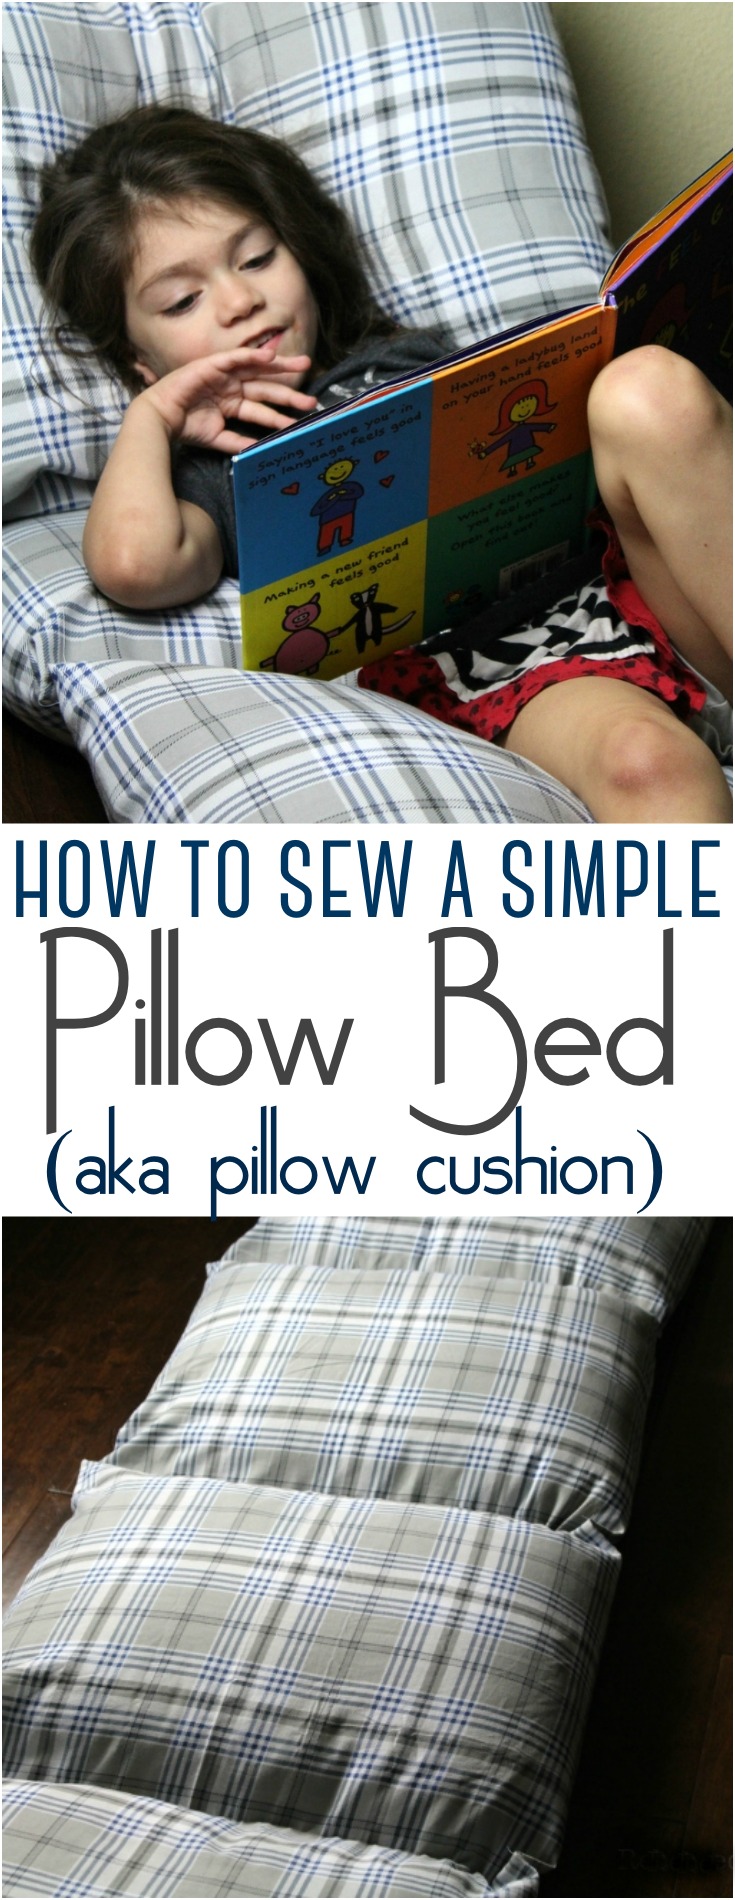 Learn how to make a pillow bed (or pillow cushion) for kids using pillows and twin flat sheet along with this simple tutorial.